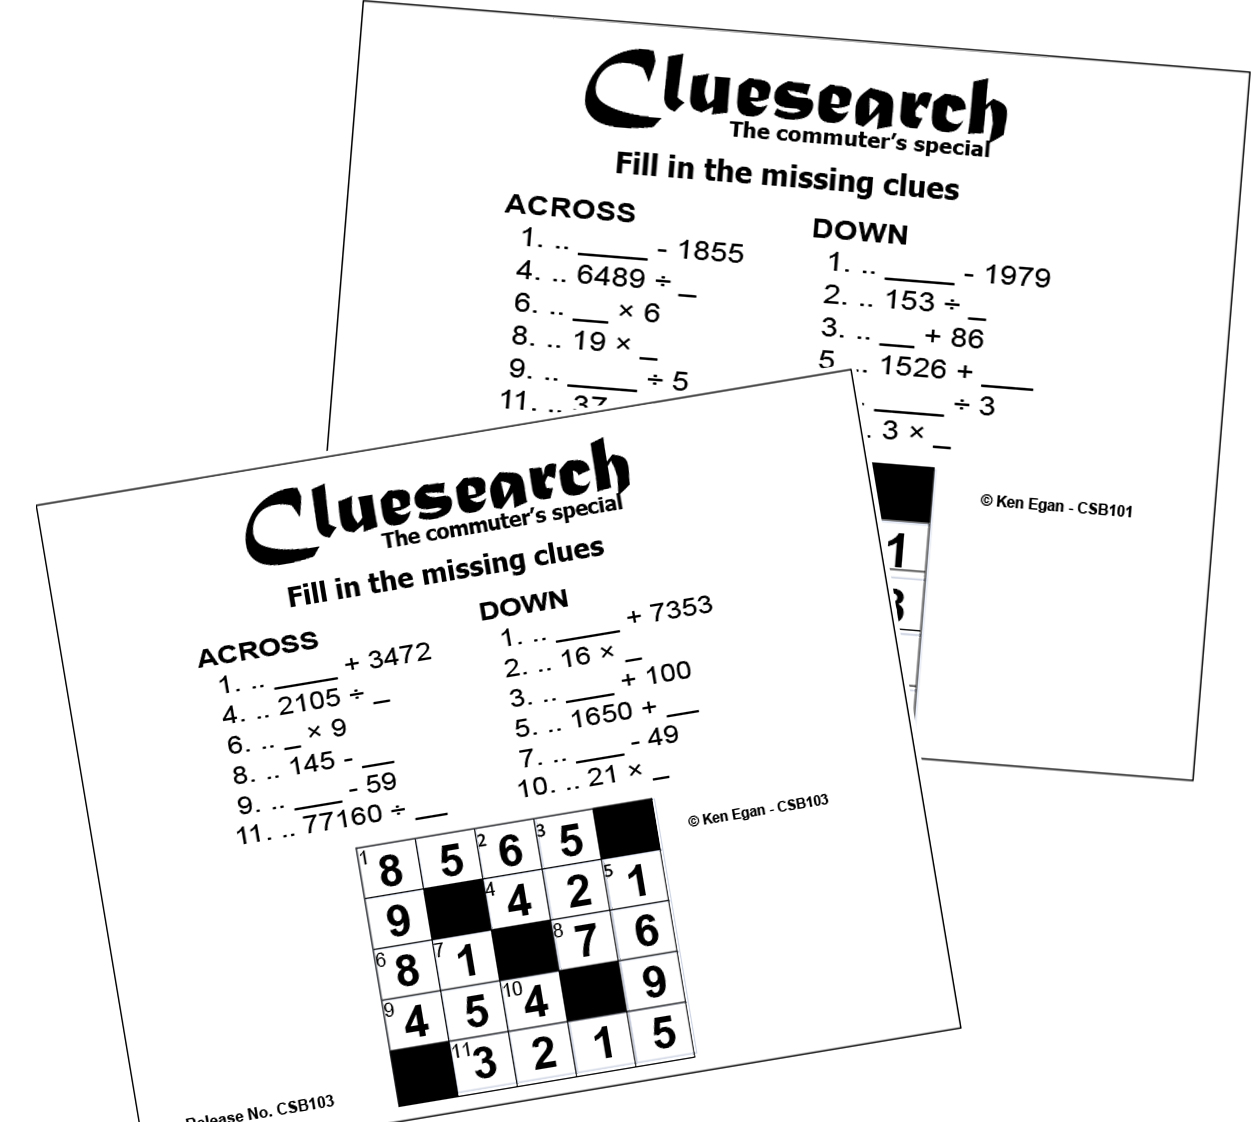 Thumbnail for 20 CLUESEARCH PUZZLE BOOKLET 01